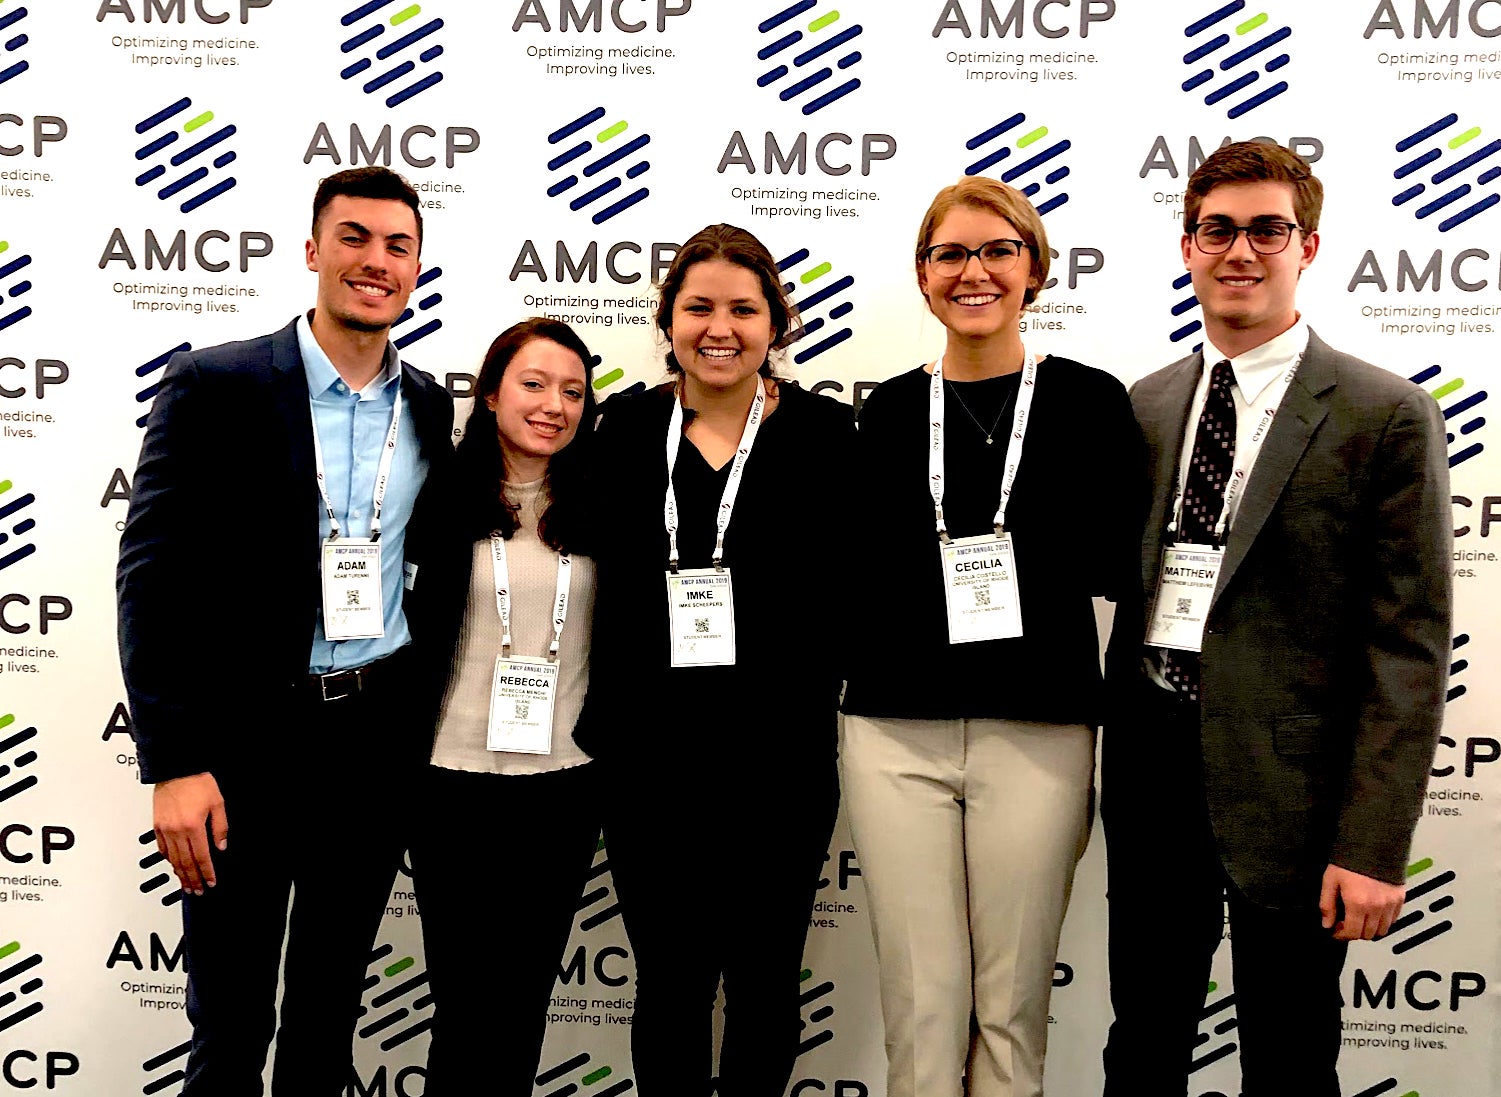 URI PharmD students Adam Turenne, Rebecca Menghi, Imke Scheepers, Cecilia Costello and Matthew Lefebvre recently competed in the AMCP national contest in San Diego.